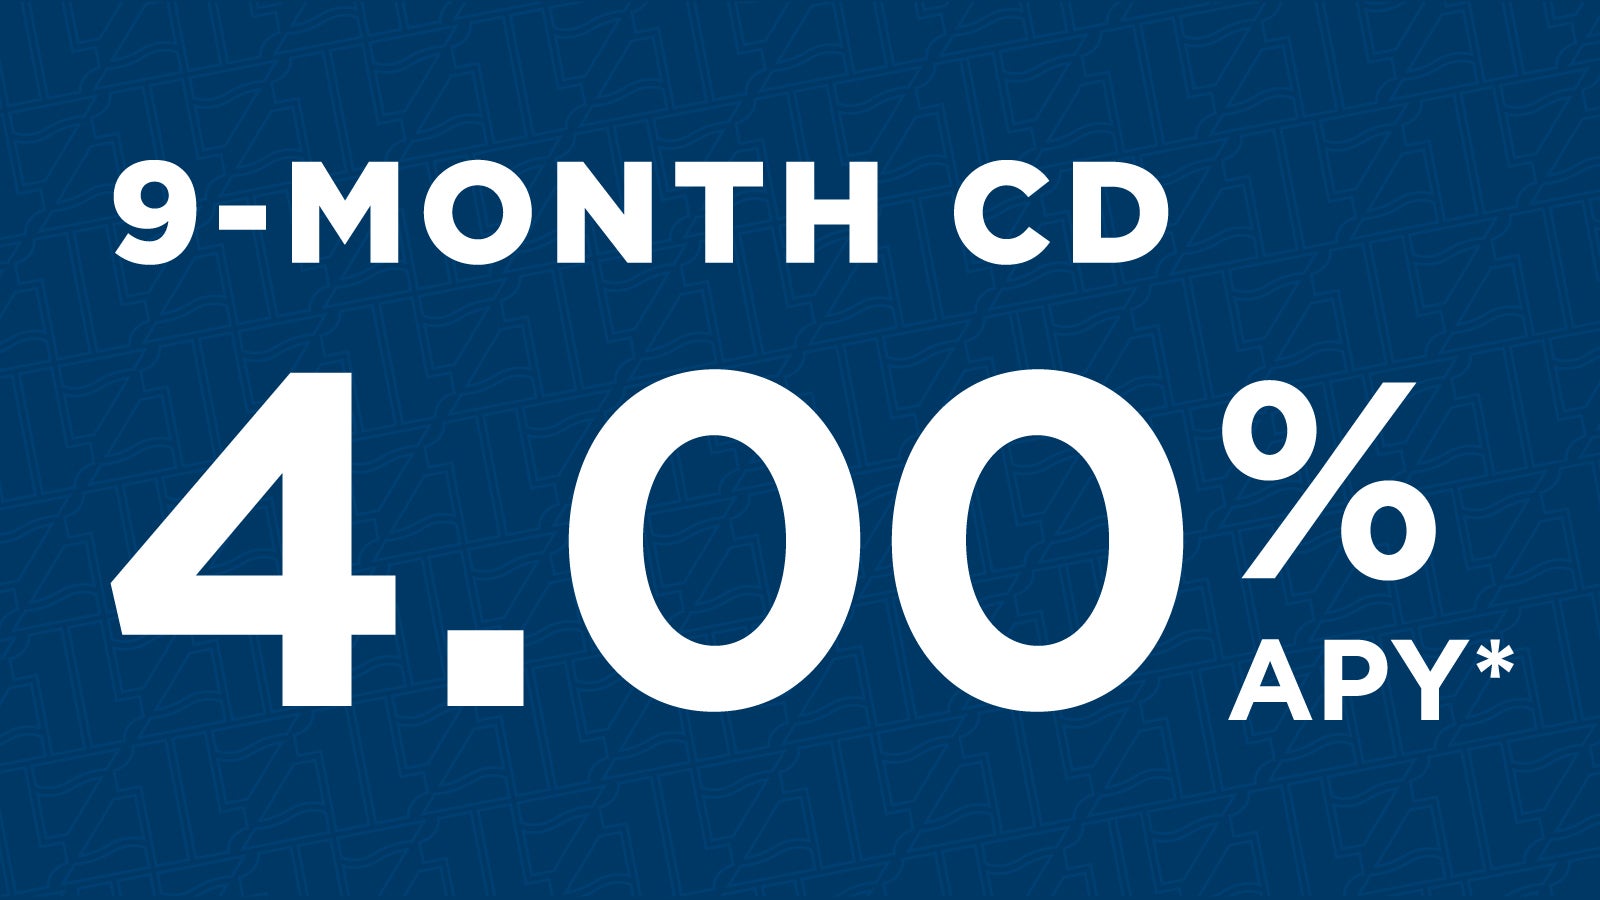 Special CD Rate | 4.00% APY for 9 months